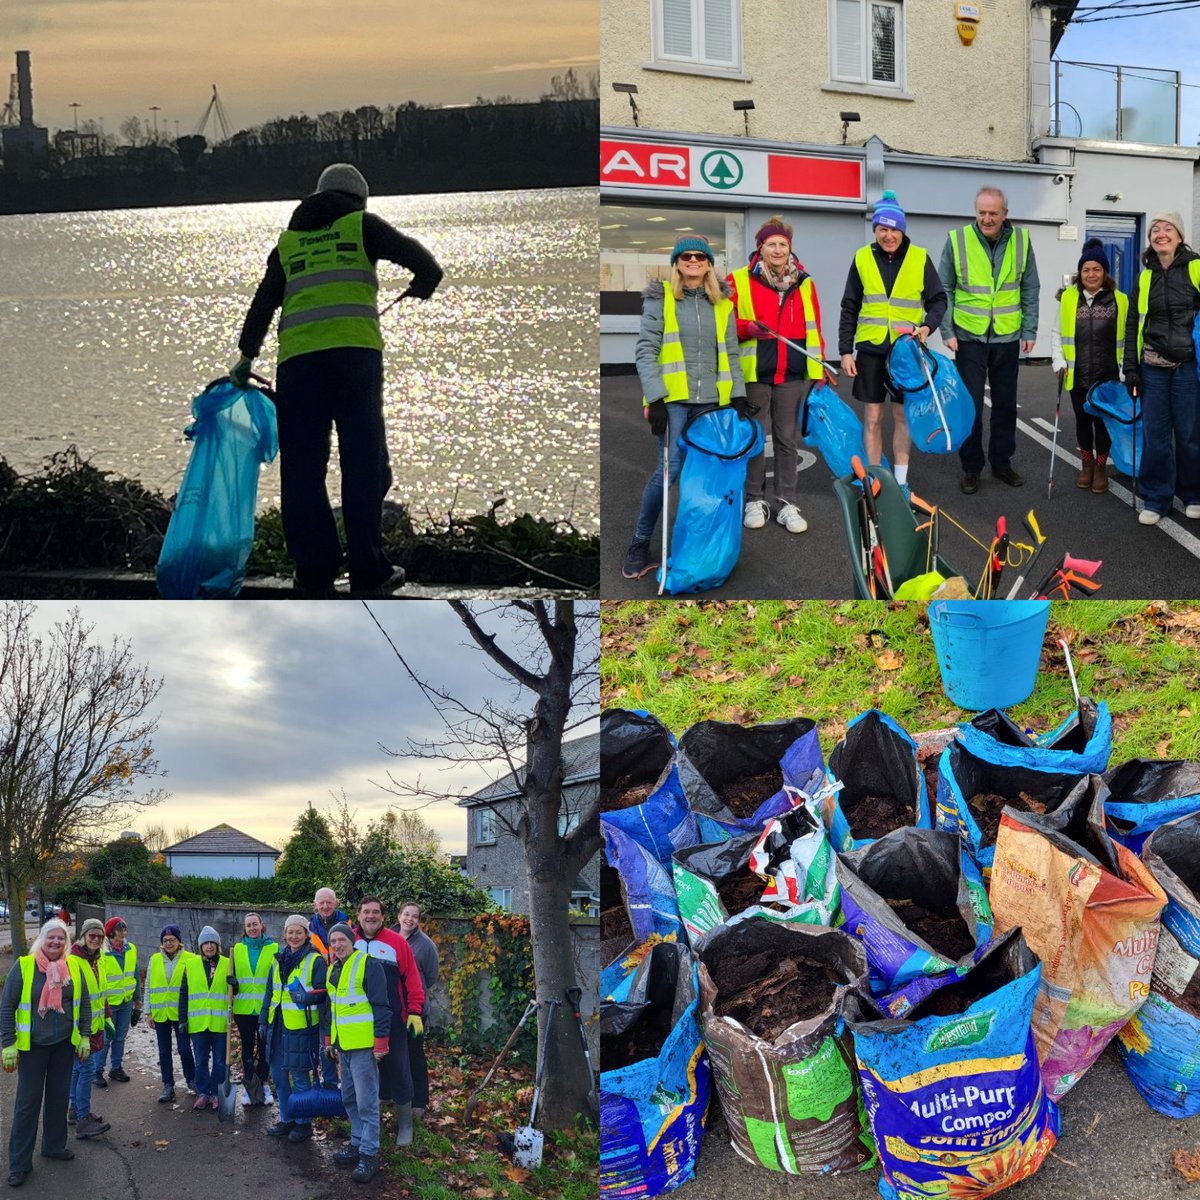 Many hands make light work. Fantastic effort across #Clontarf today. #LitterPick on the prom and some lovely leaf mulch collected for the flower planters from our leaf nets. #Biodiversity initiative in action. Please help #KeepClontarfTidy and please only leaves 🍃 in the nets!